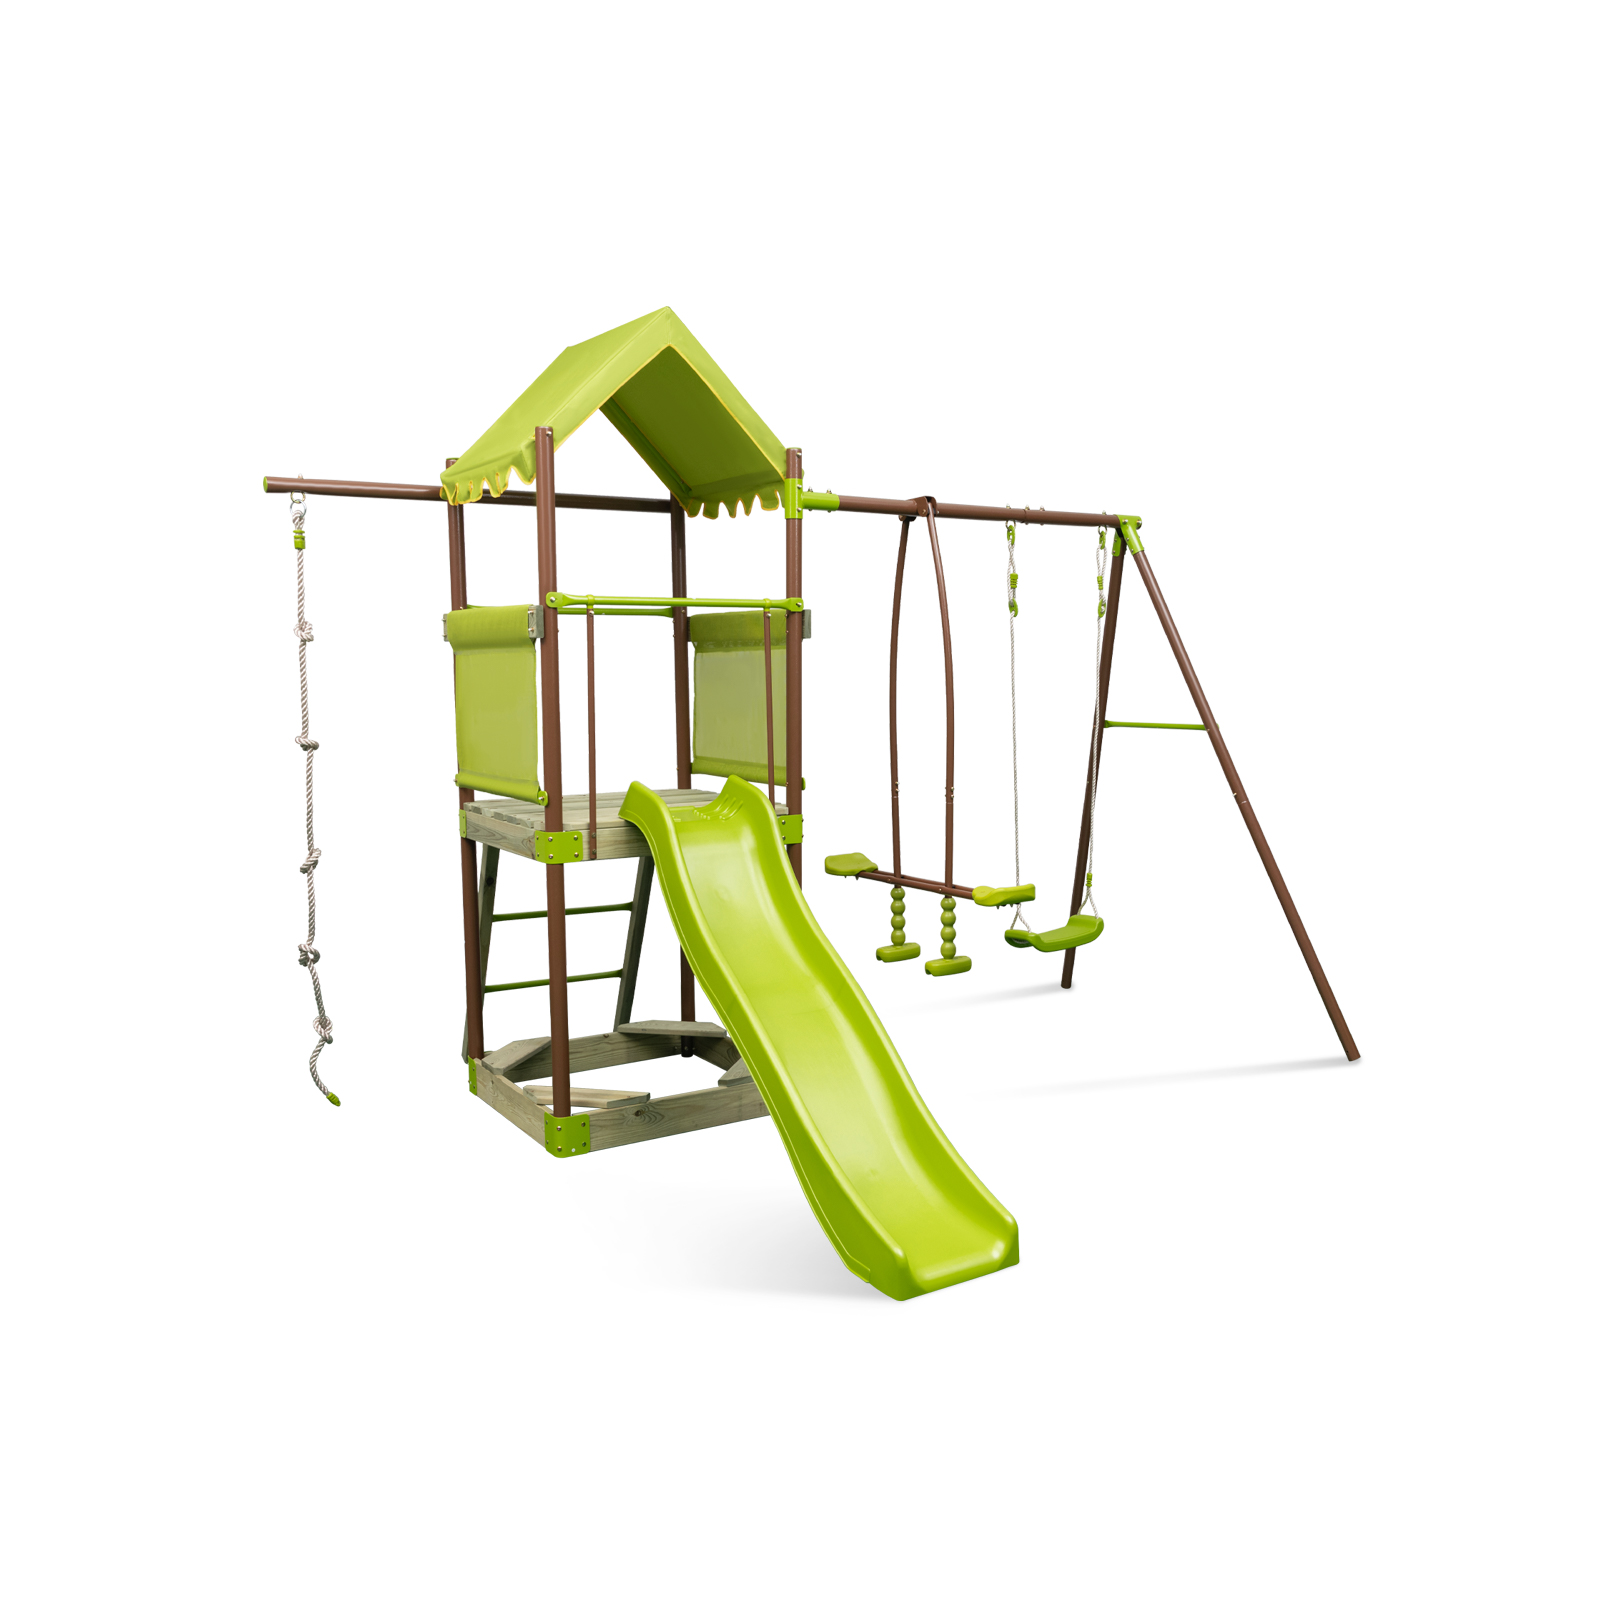 7-in-1 Swing Set Outdoor Metal Playset with Covered Fort-Green